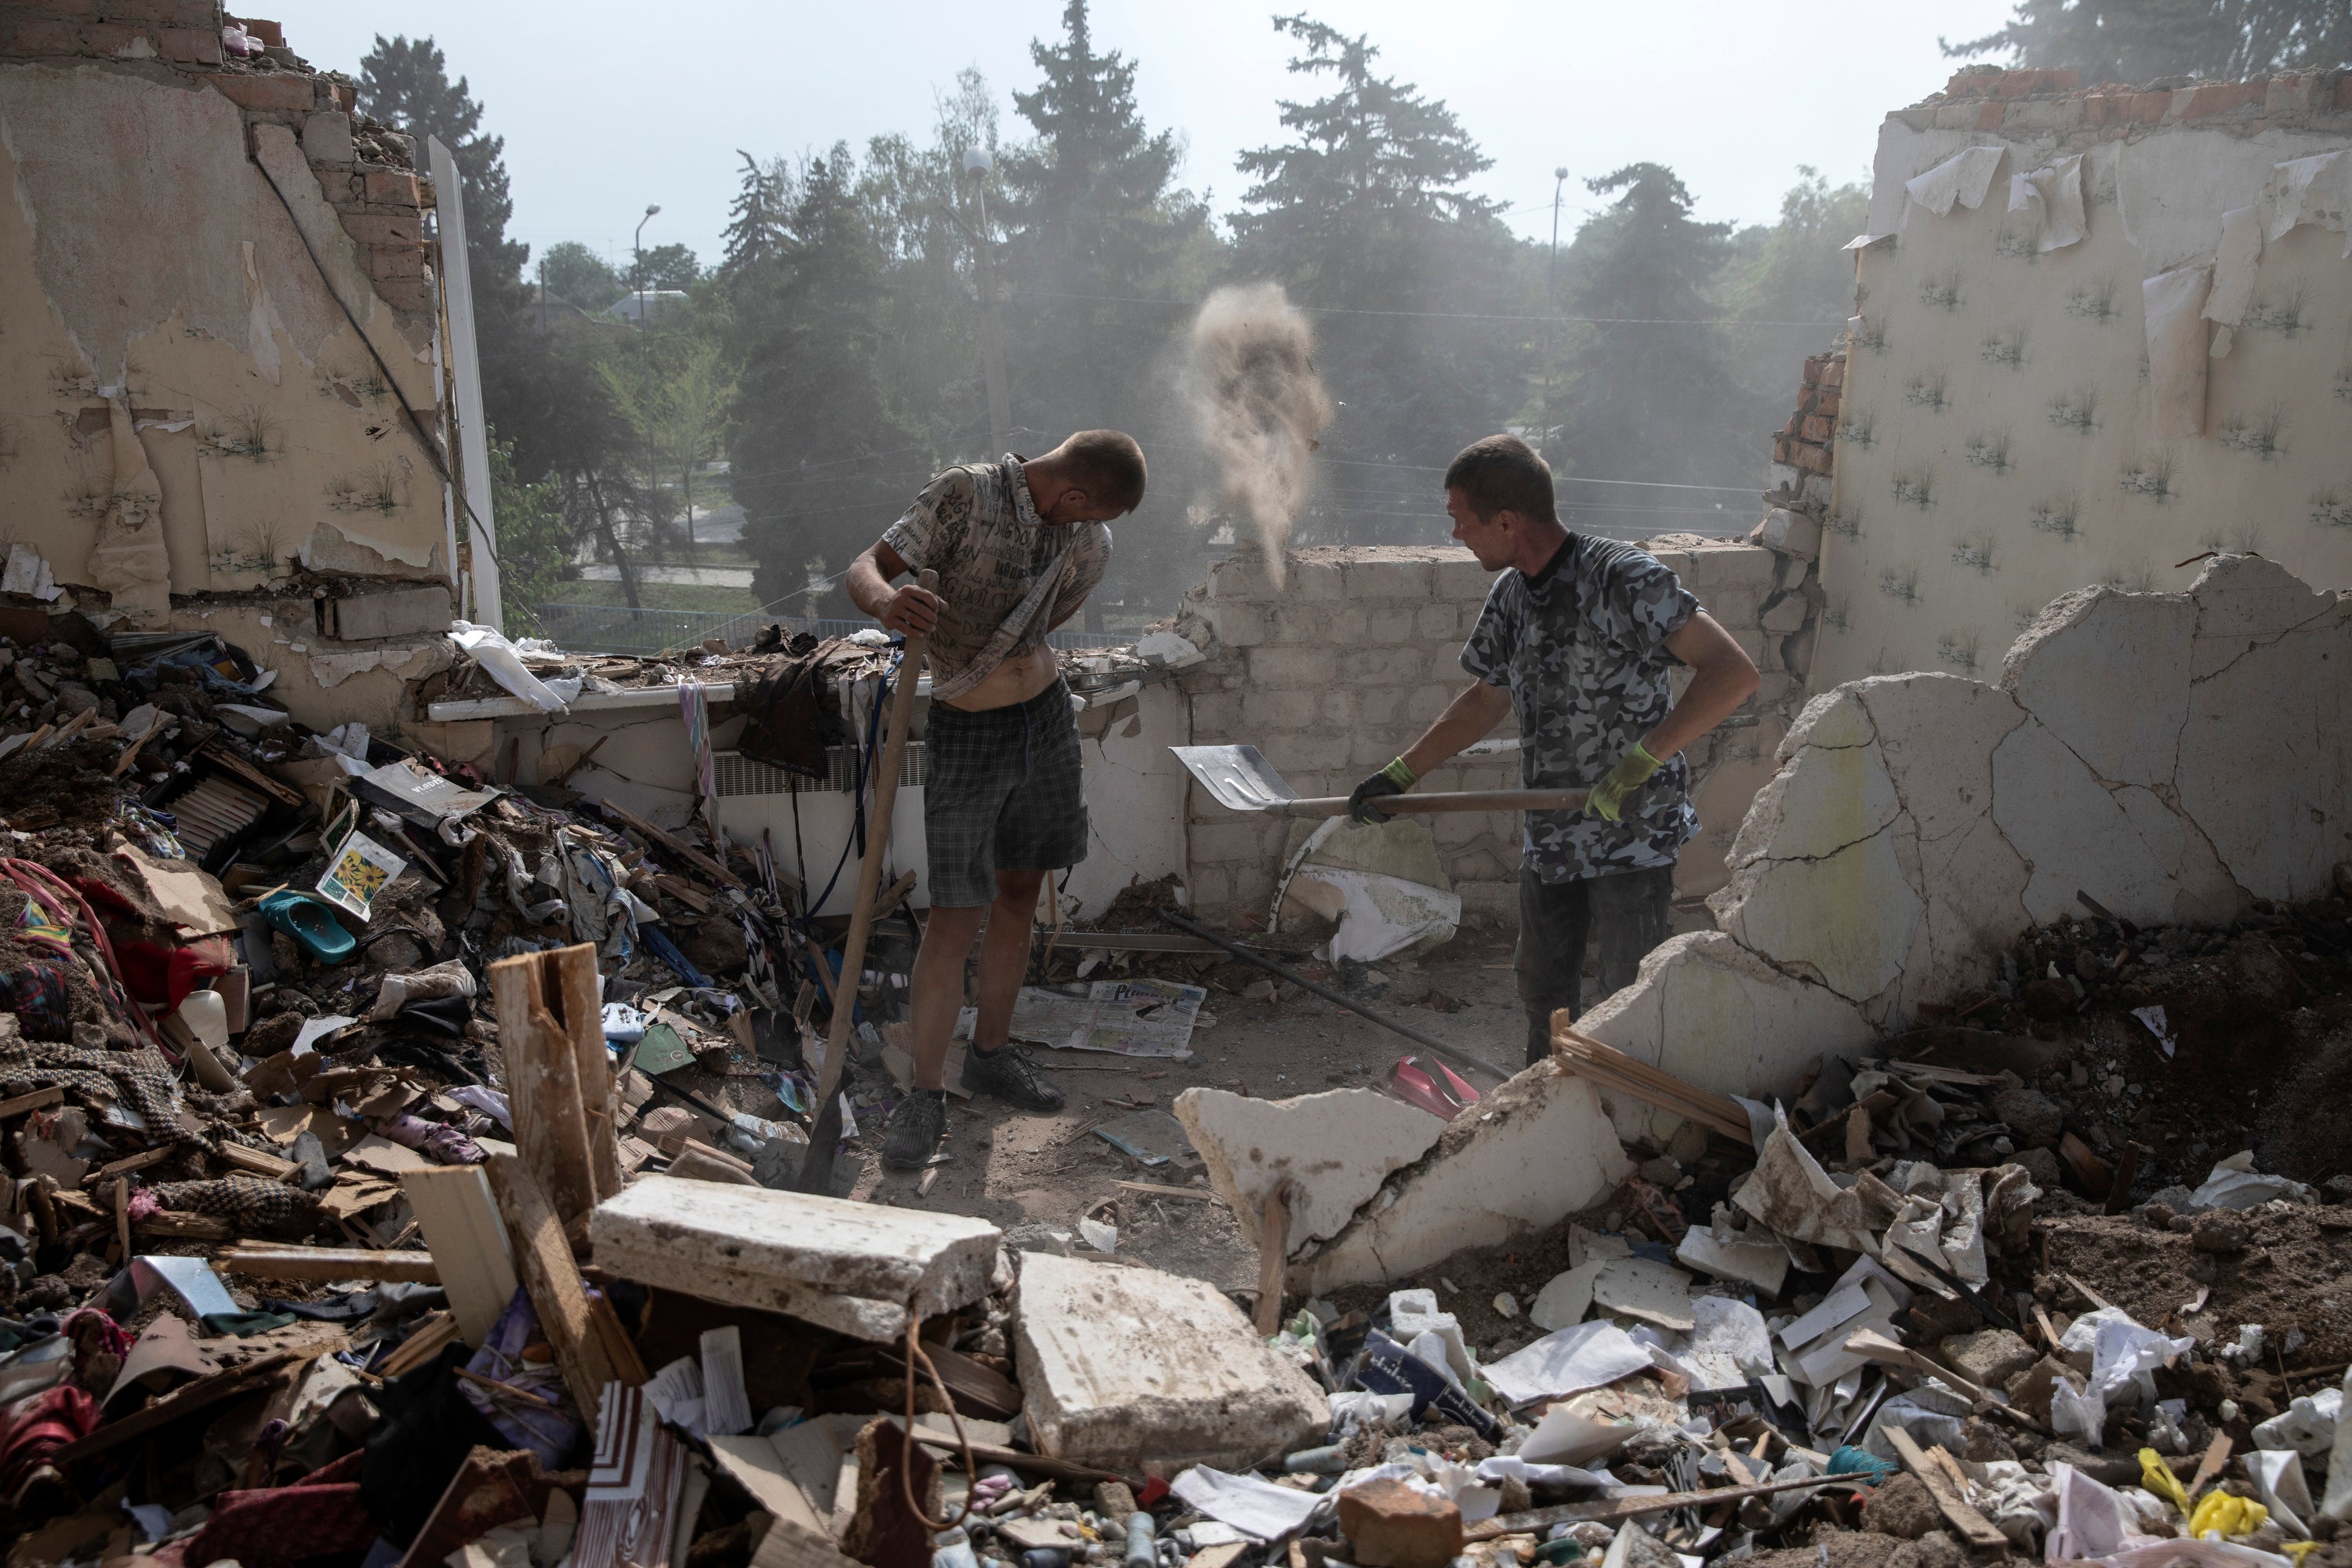 Andre Kovalenko, (left), 34, and Victor, who gave only his first name, work to recover belongings from a badly damaged apartment